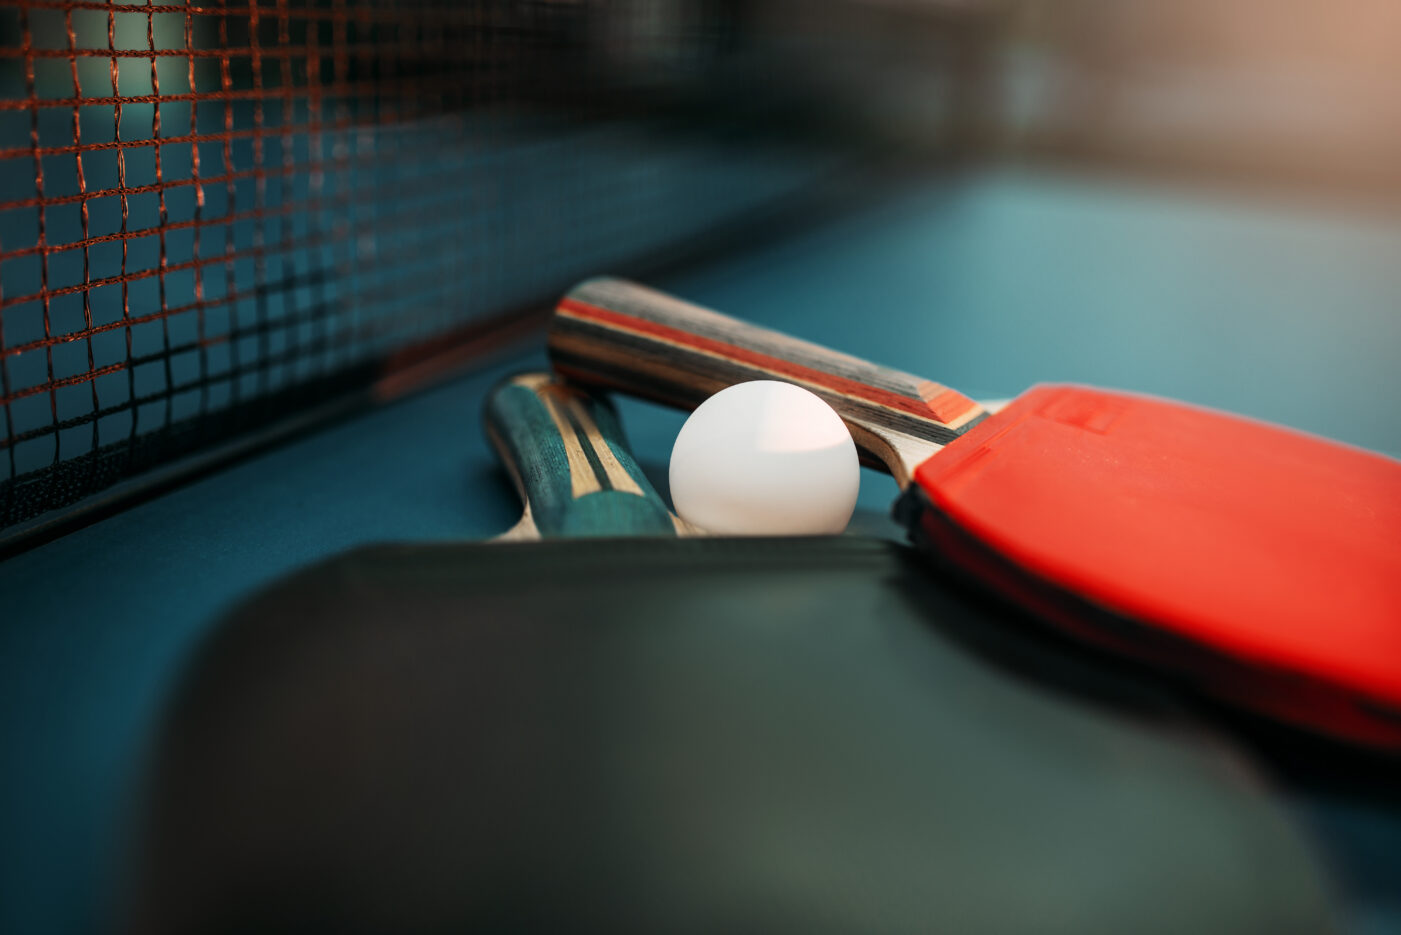 Tennis rackets and ball on the table, game concept